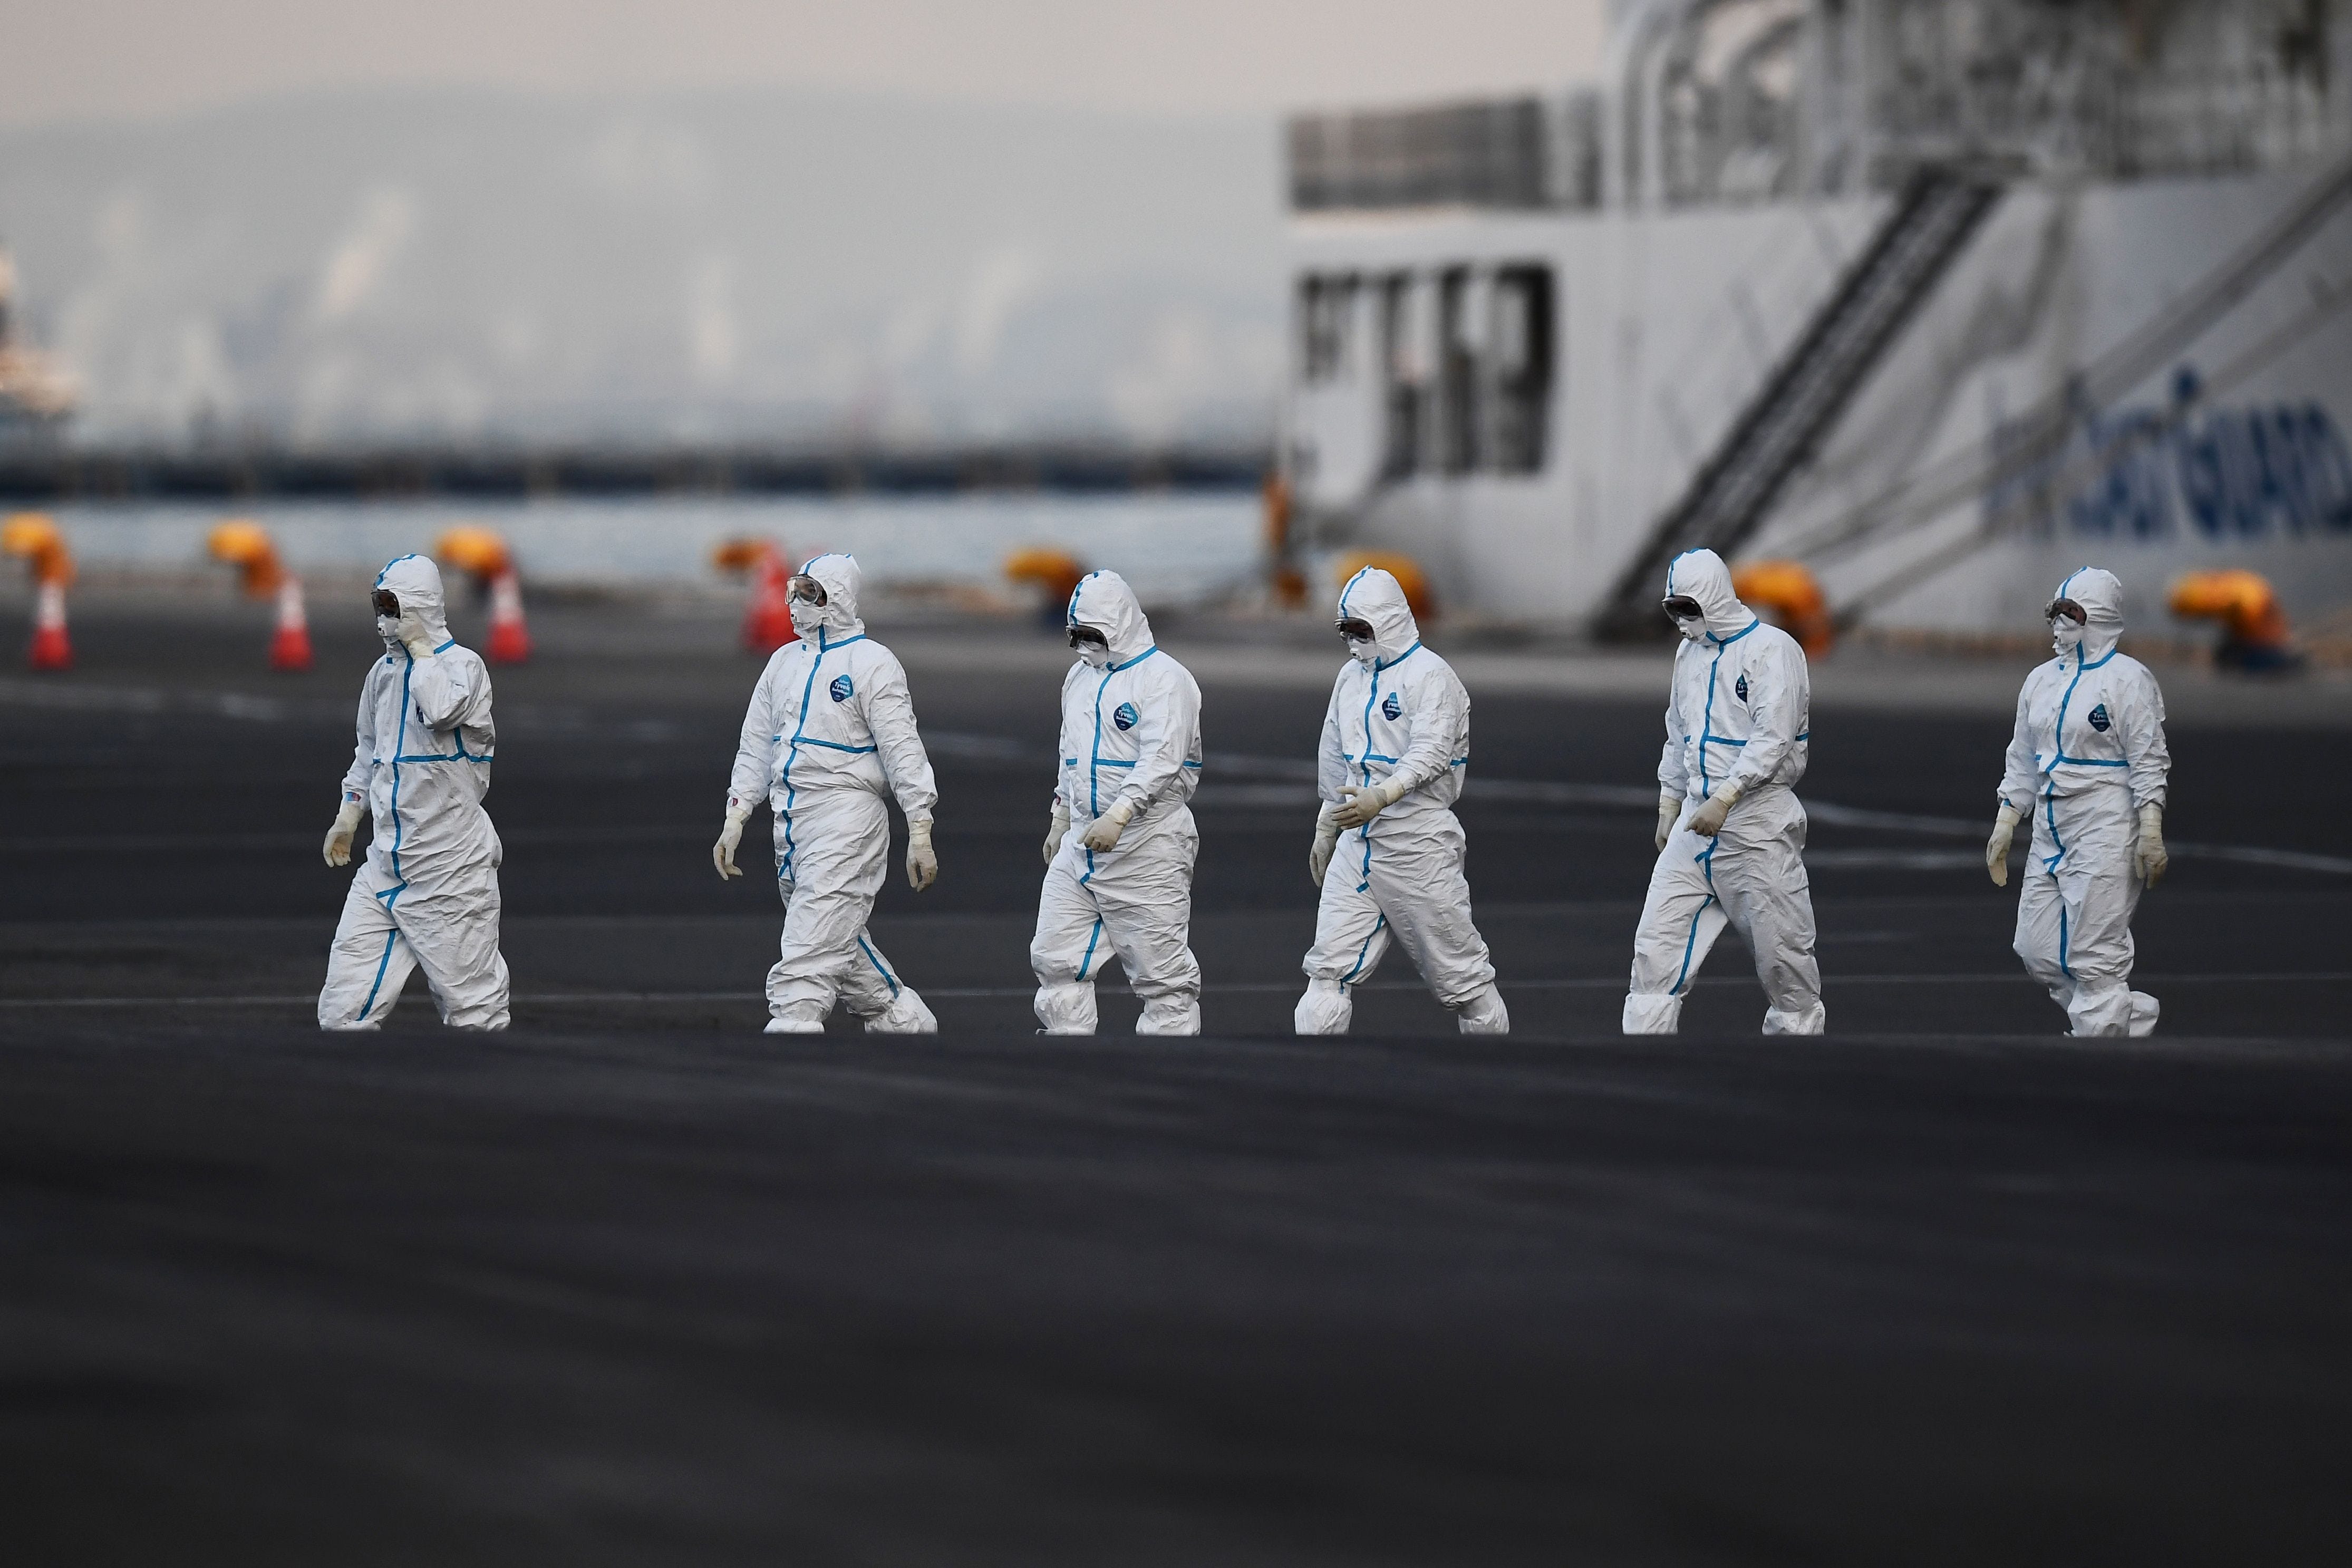 People wearing protective suits walk from the Diamond Princess cruise ship, with around 3,600 people quarantined onboard due to fears of the new coronavirus, at the Daikoku Pier Cruise Terminal in Yokohama port on Feb. 10, 2020. Around 60 more people on board the quarantined Diamond Princess cruise ship moored off Japan have been diagnosed with novel coronavirus, the country's national broadcaster said on February 10, raising the number of infected passengers and crew to around 130.